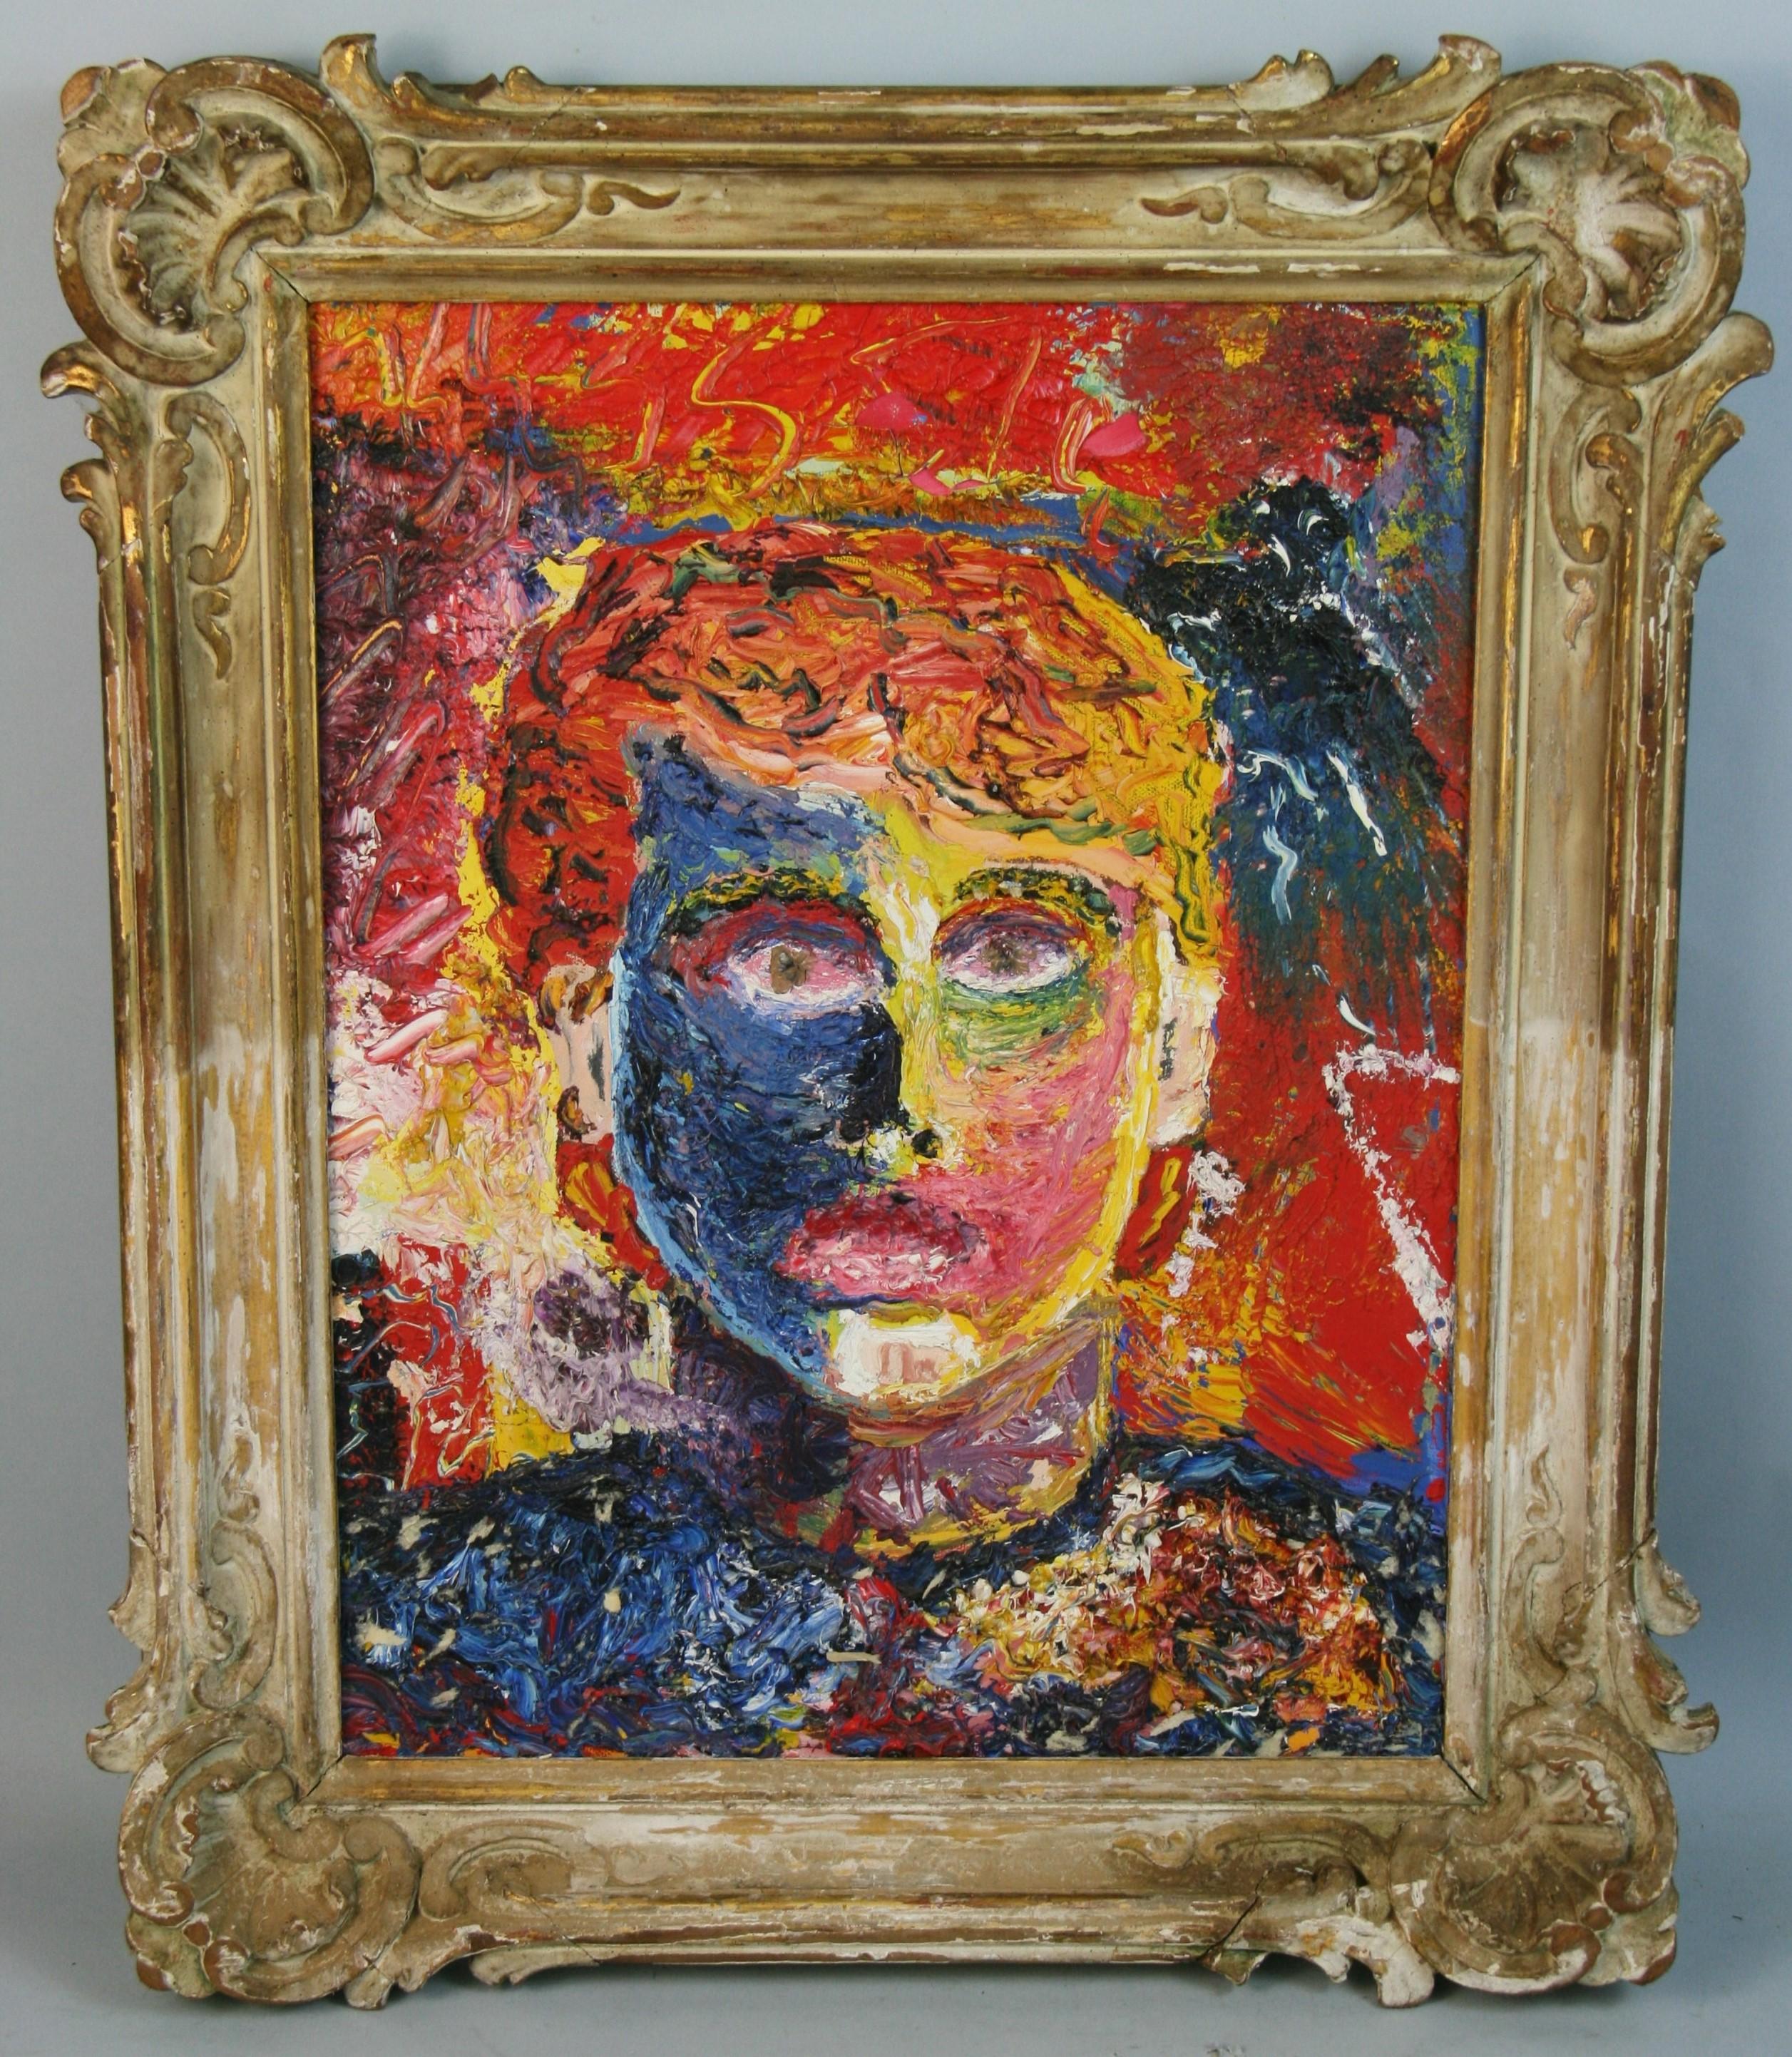 5050 Heavy impasto figurative oil painting
Set in a hand carved 19th century wood frame
Image size 17.5x 13.5